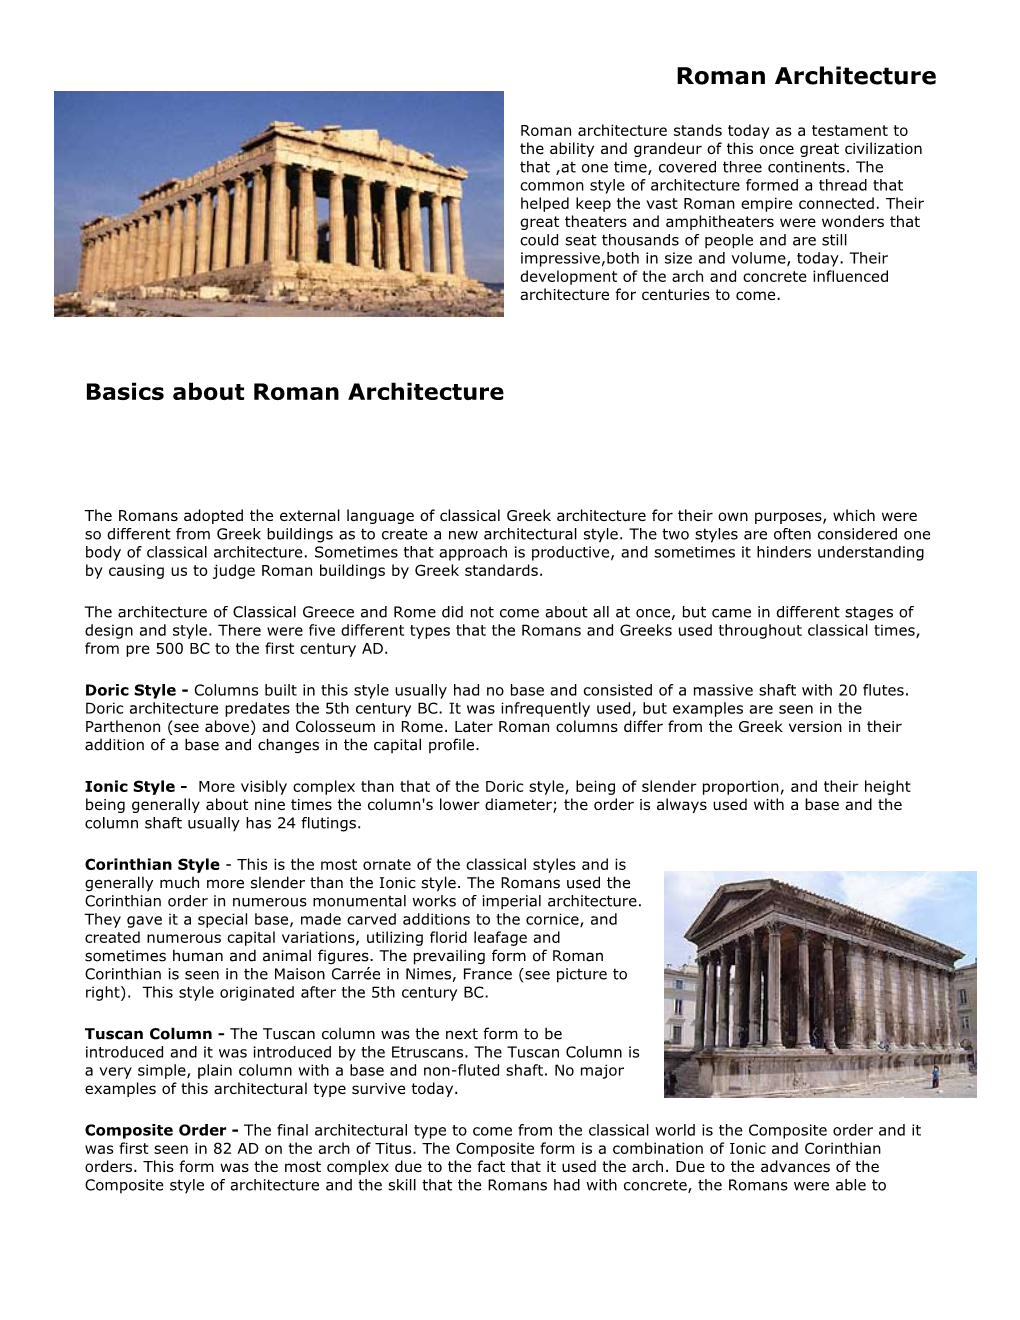 Roman Architecture Stands Today As a Testament to the Ability and Grandeur of This Once